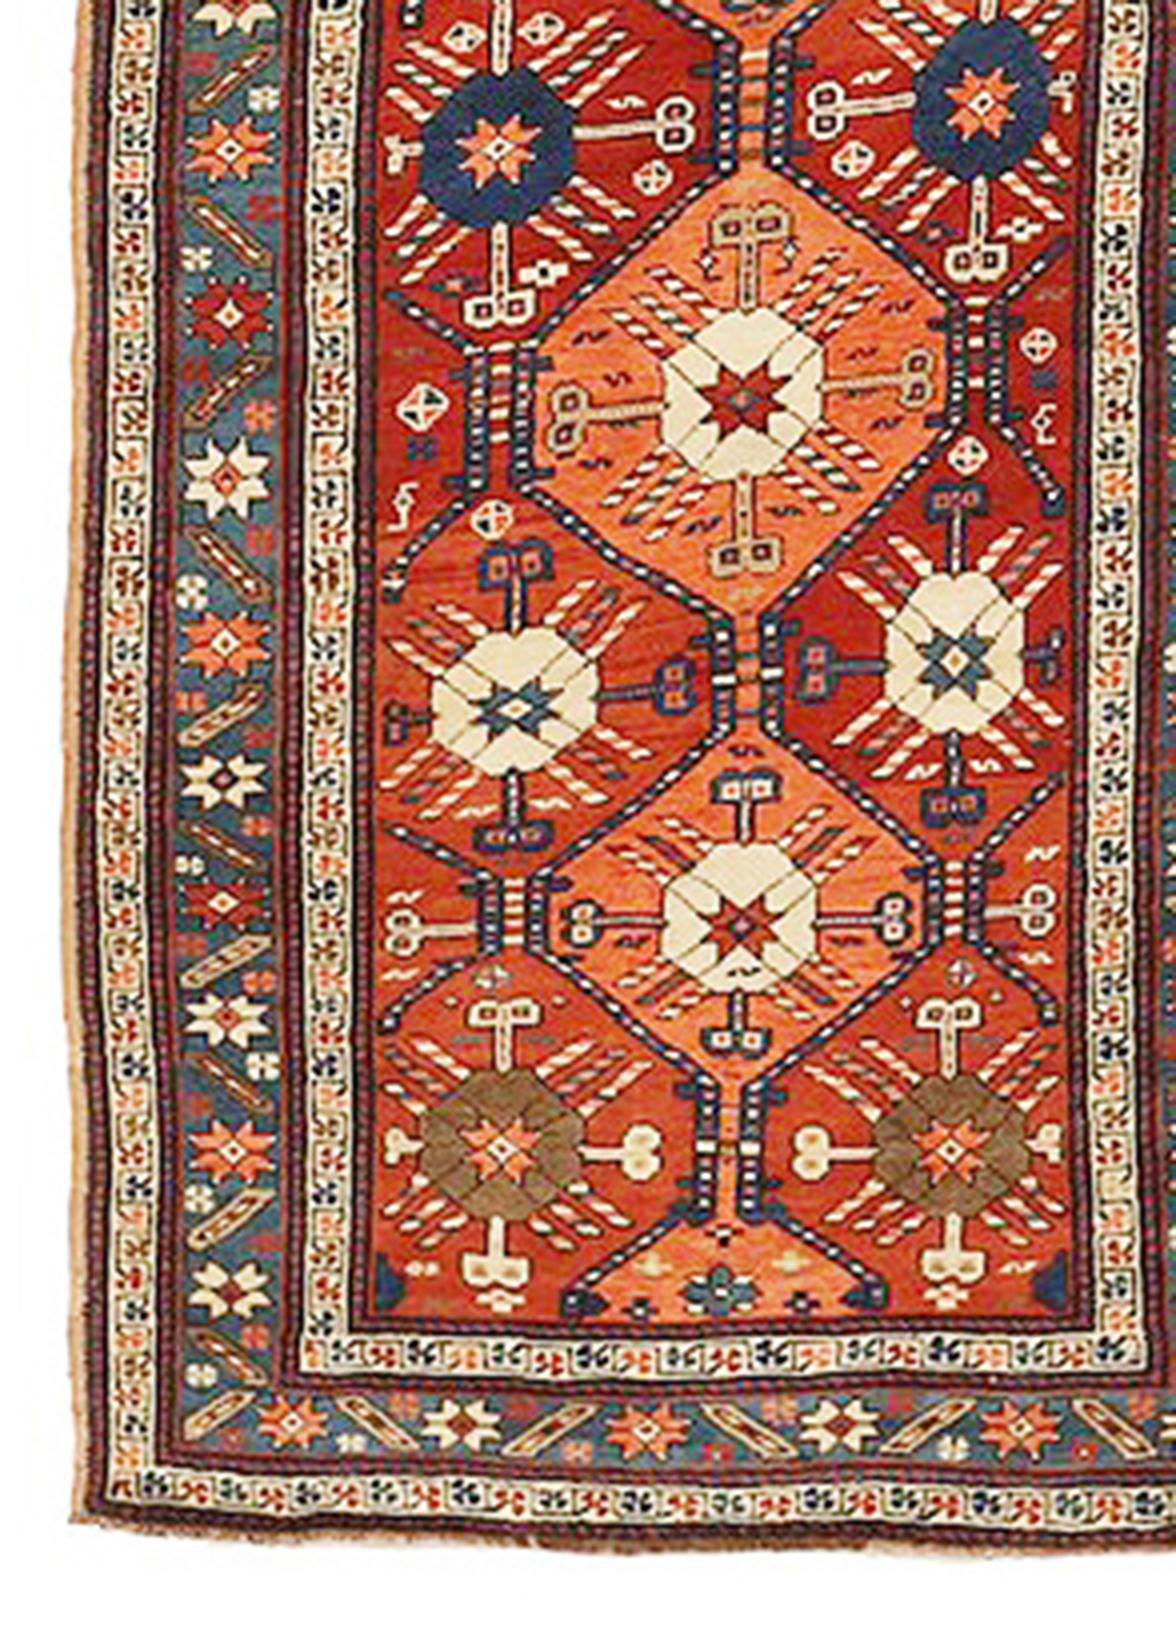 Hand-Woven Antique Russian Kazak Runner Rug with Colored Stars & Geometric Medallions For Sale